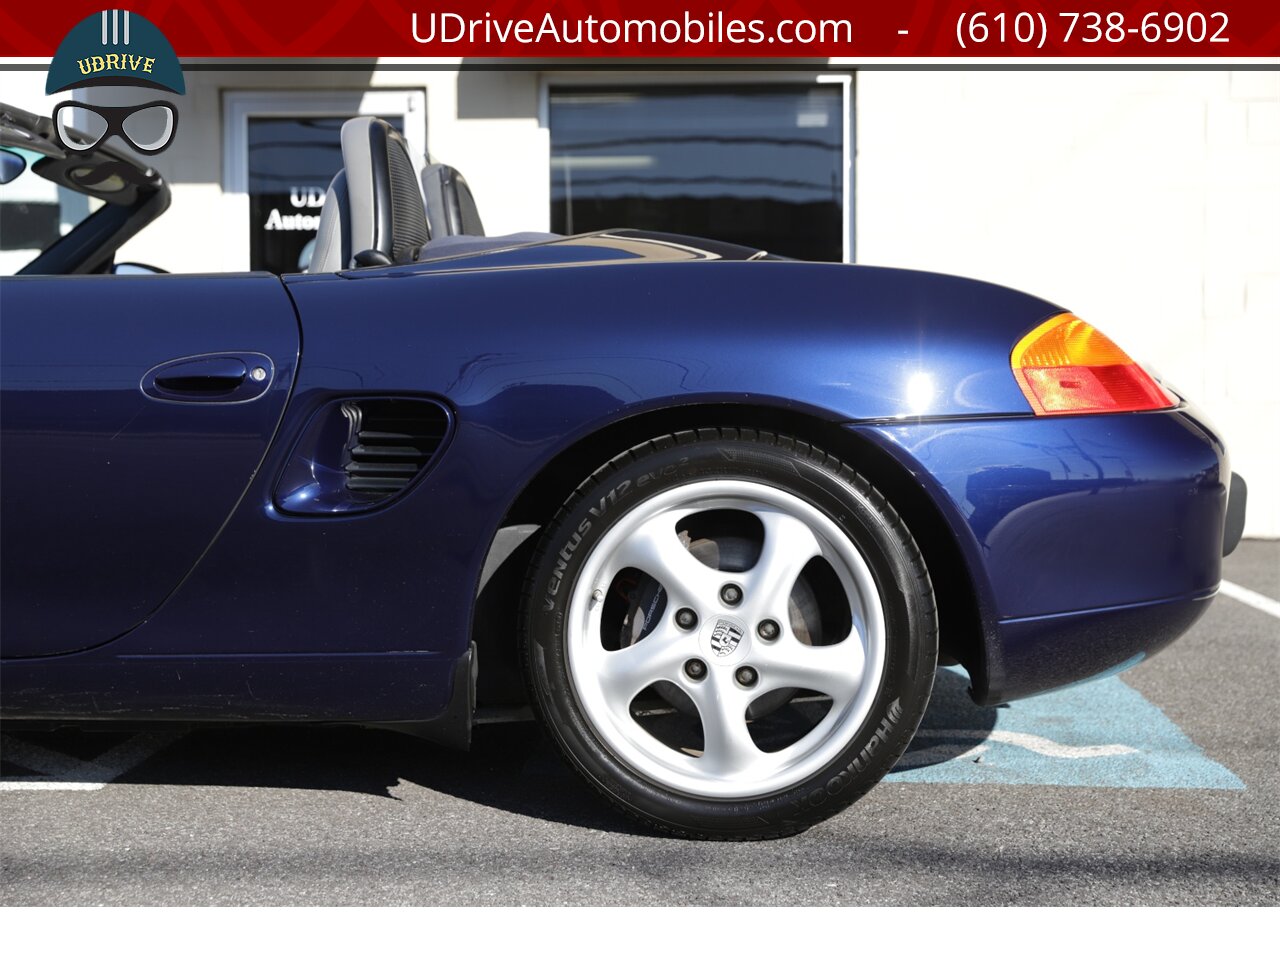 2001 Porsche Boxster 5 Speed Manual Detailed Service History  Same Owner for Last 18 Years Hard Top Included - Photo 20 - West Chester, PA 19382